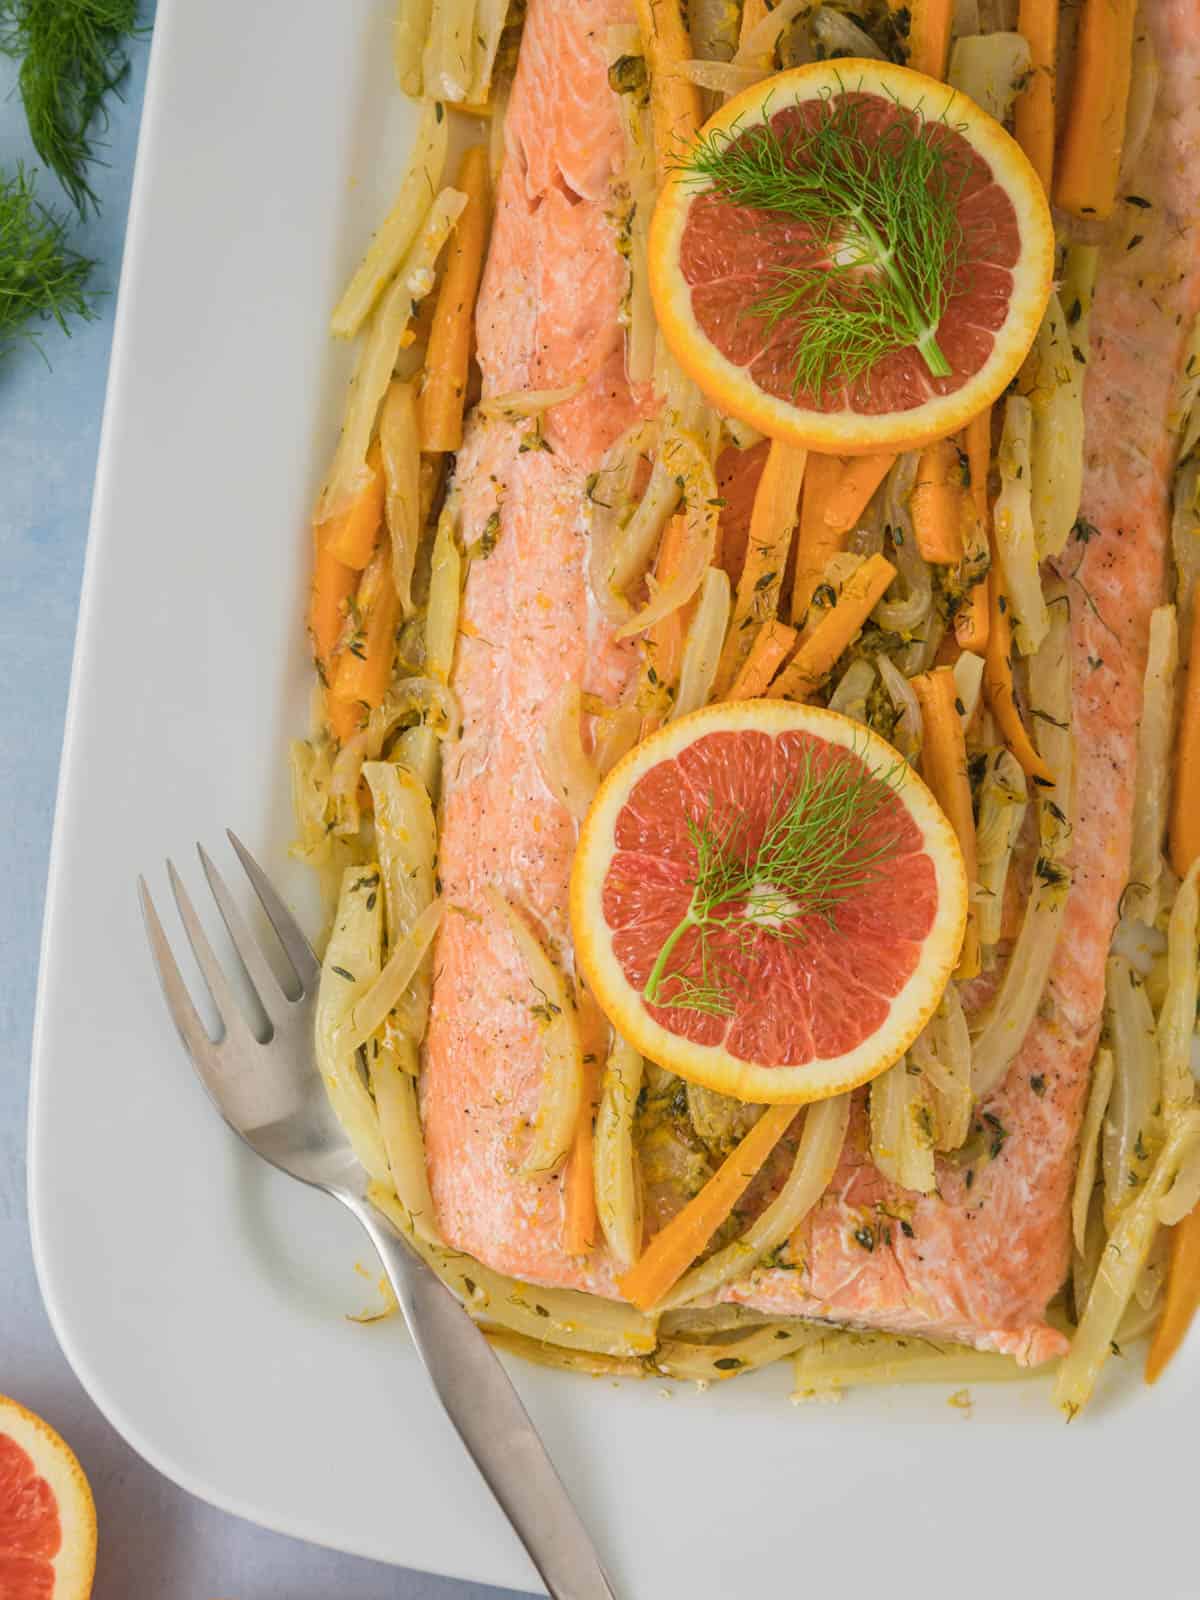 Foil roasted salmon with fennel topped with orange slices on a baking sheet.